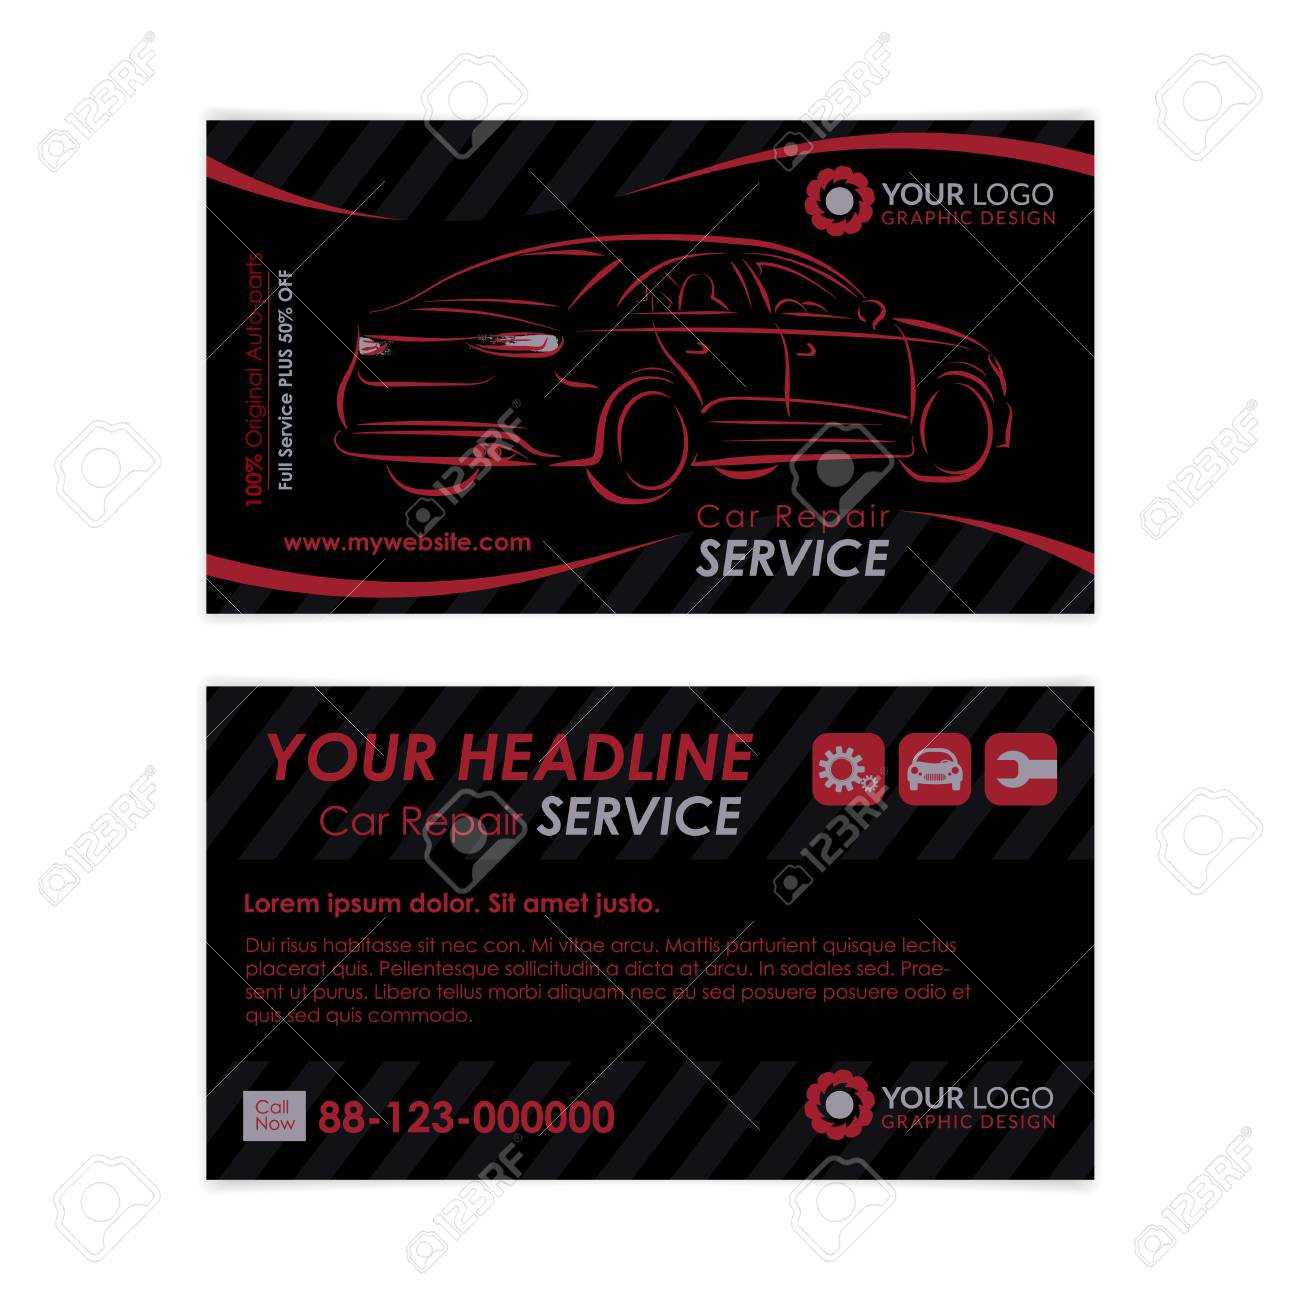 Auto Repair Business Card Template. Create Your Own Business.. Intended For Automotive Business Card Templates